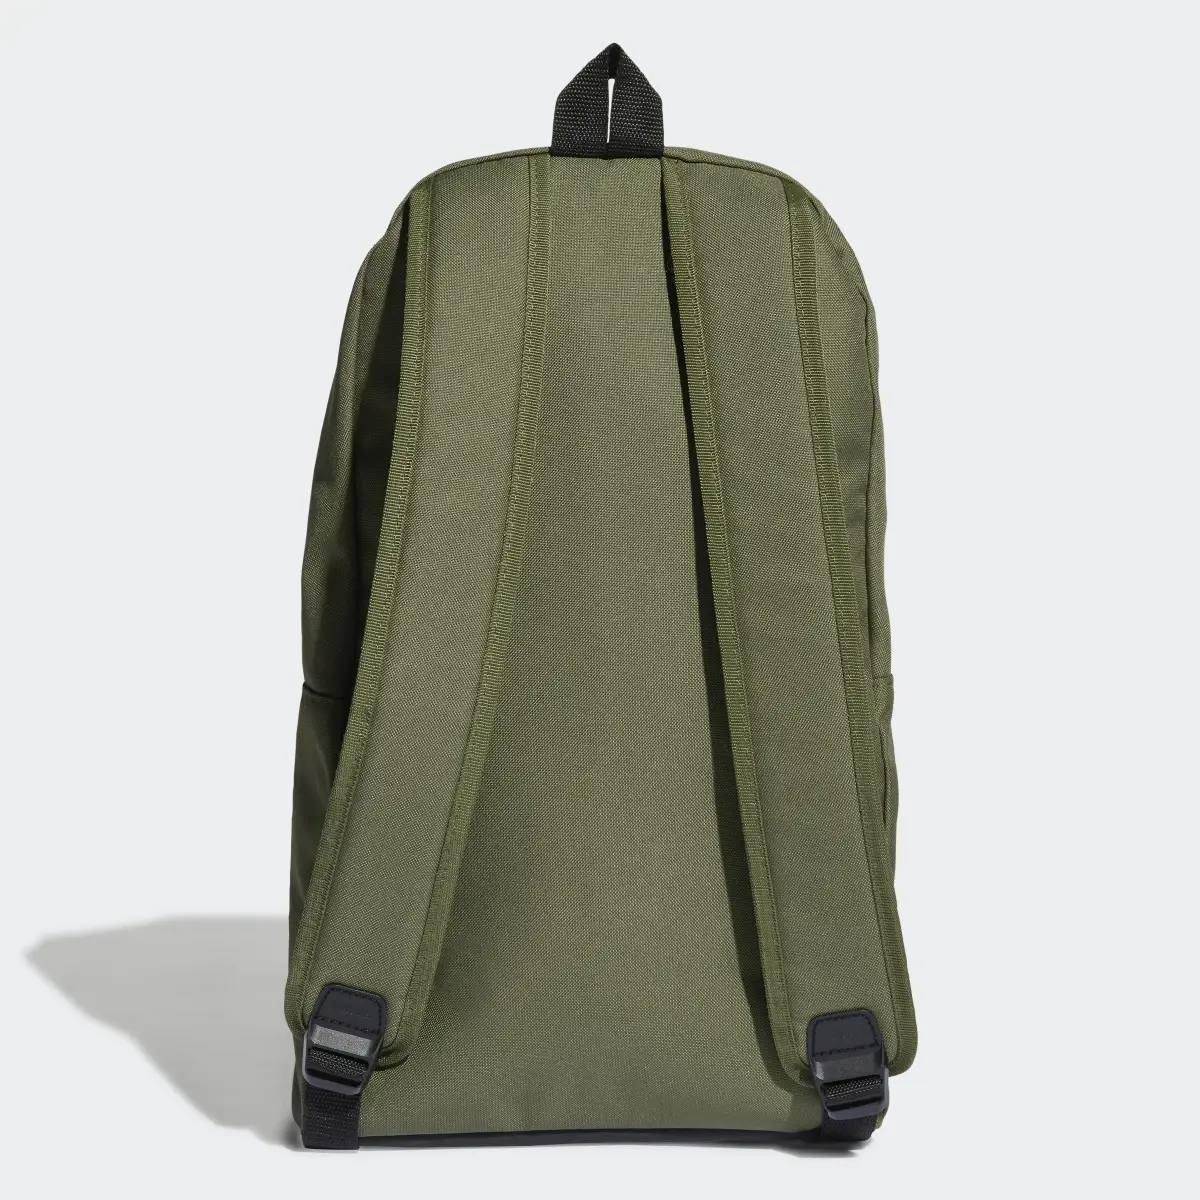 Adidas Linear Classic Daily Backpack. 3